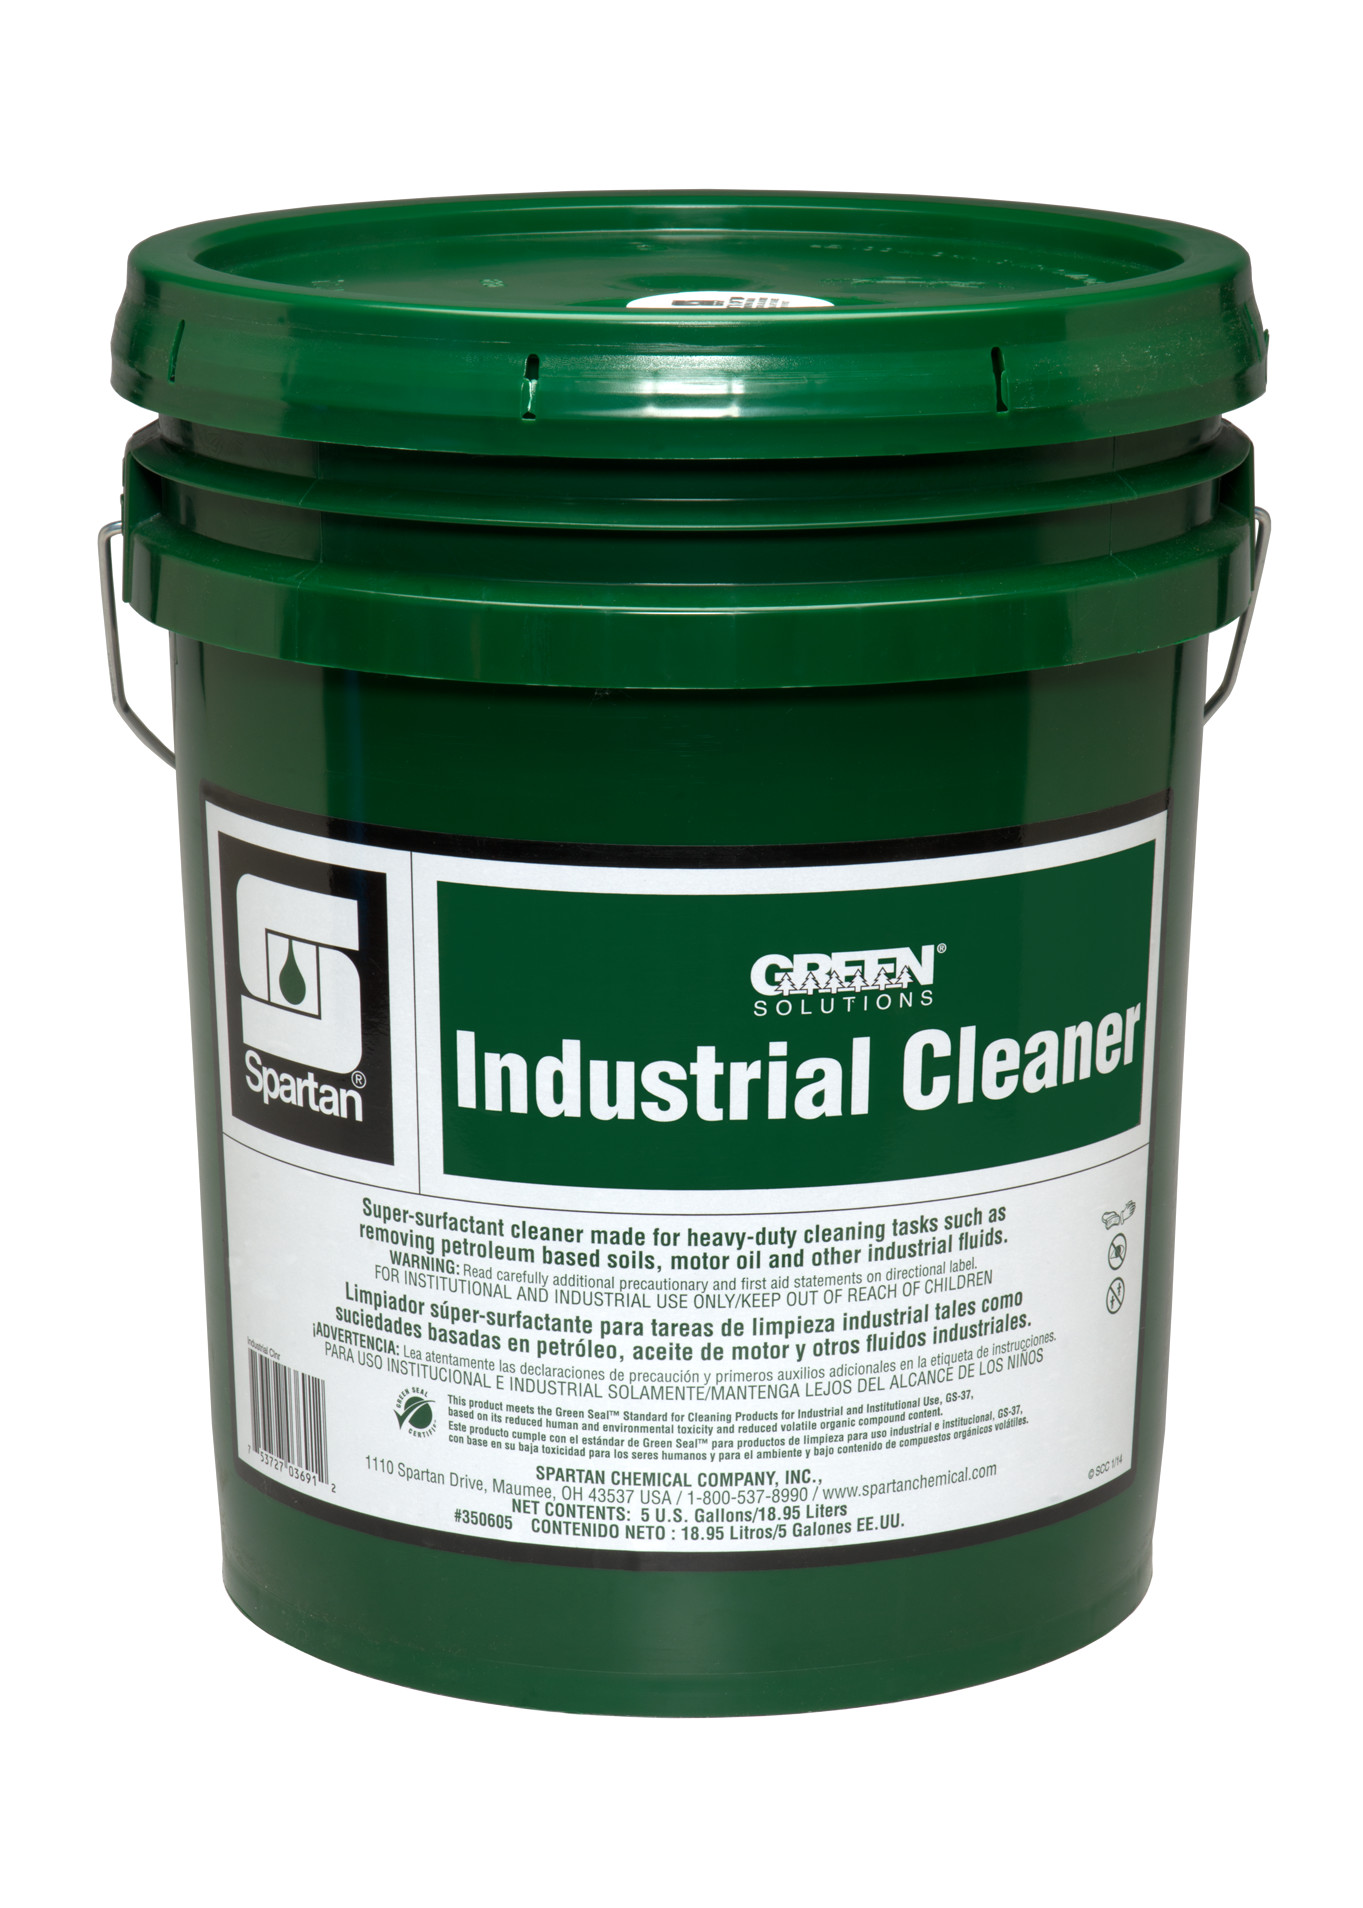 Spartan Chemical Company Green Solutions Industrial Cleaner, 5 GAL PAIL